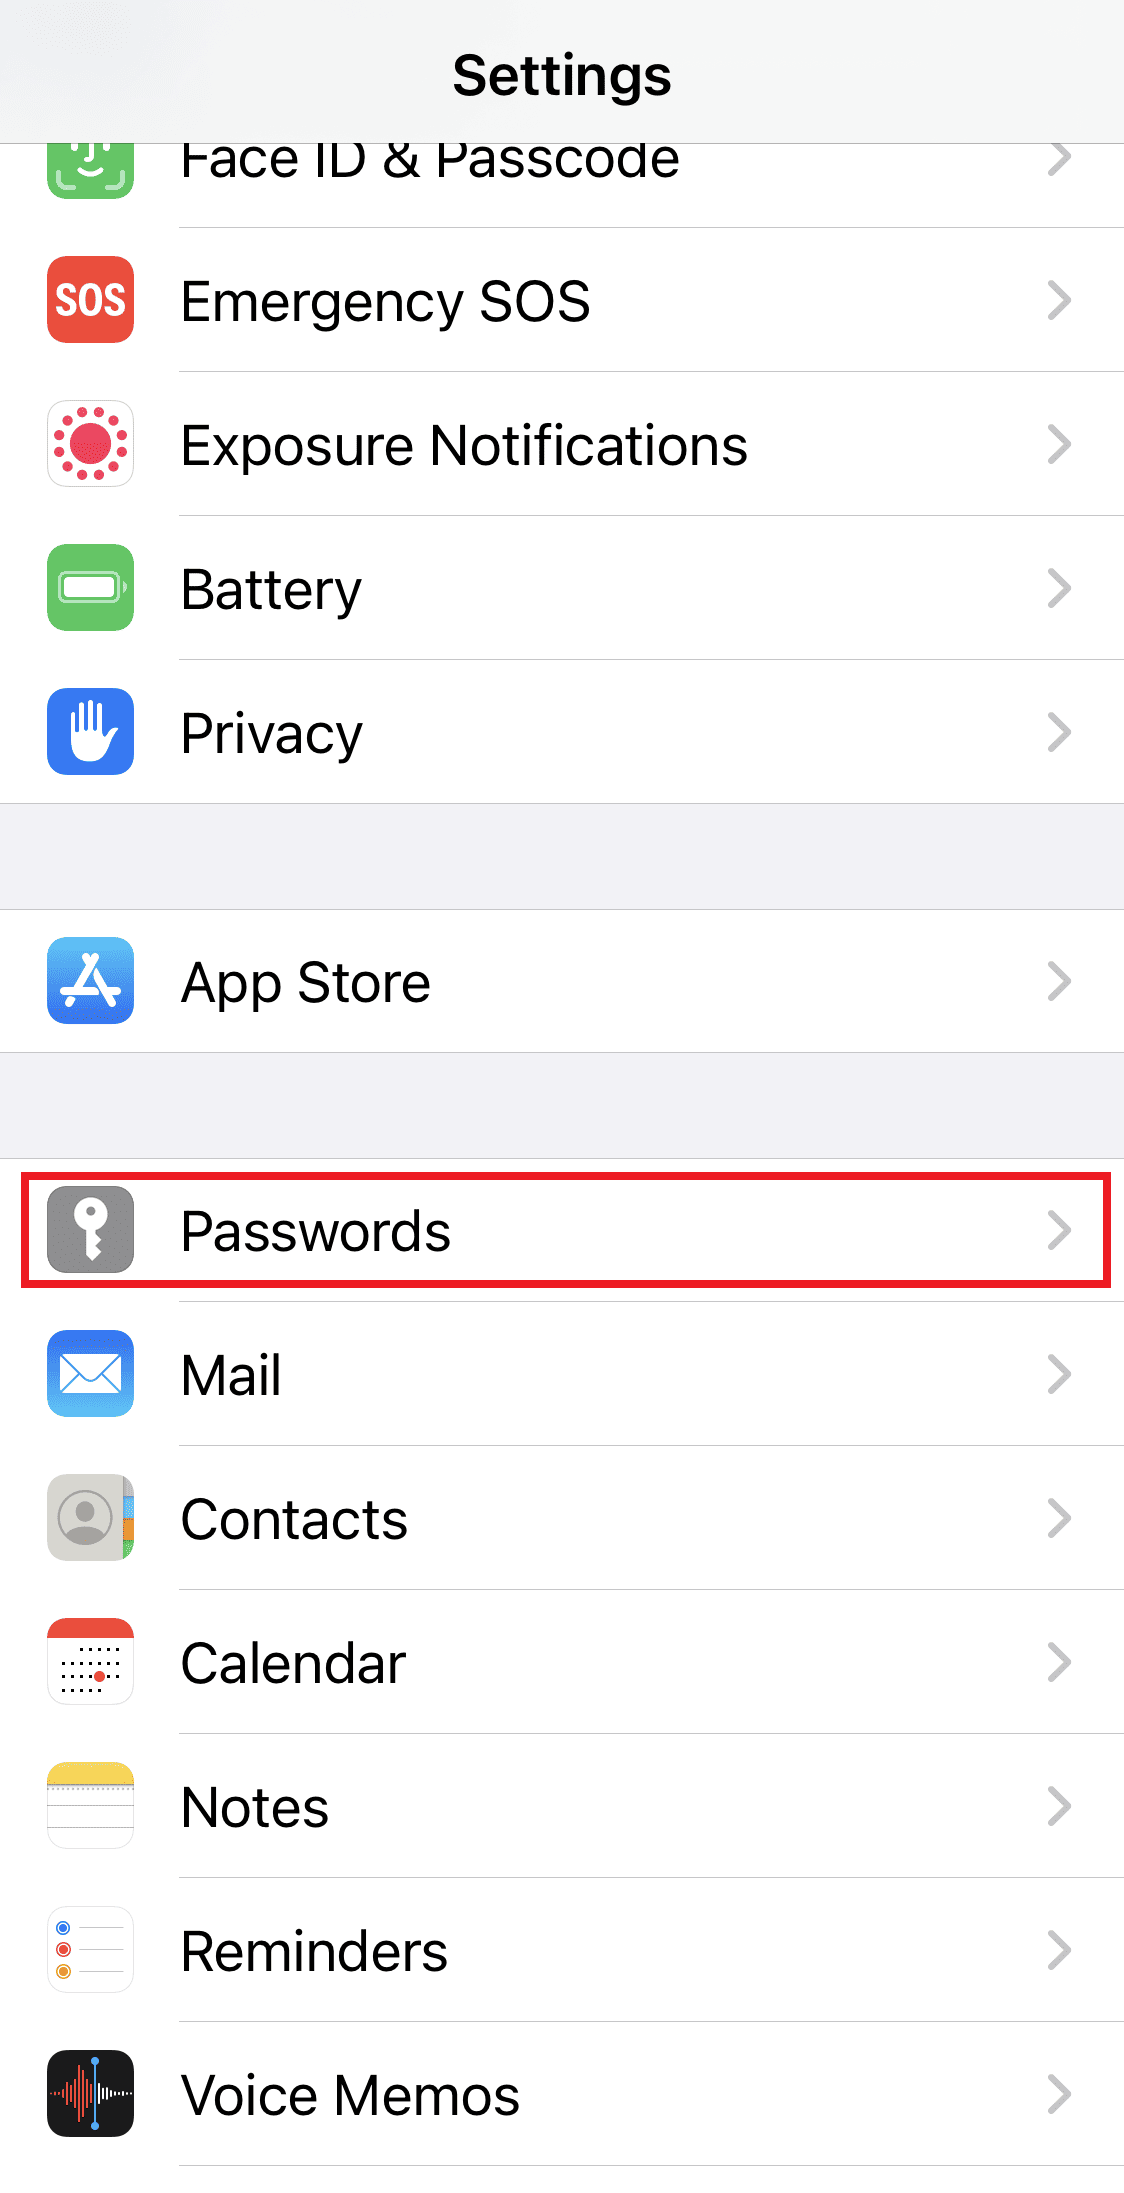 Swipe down and tap on Passwords